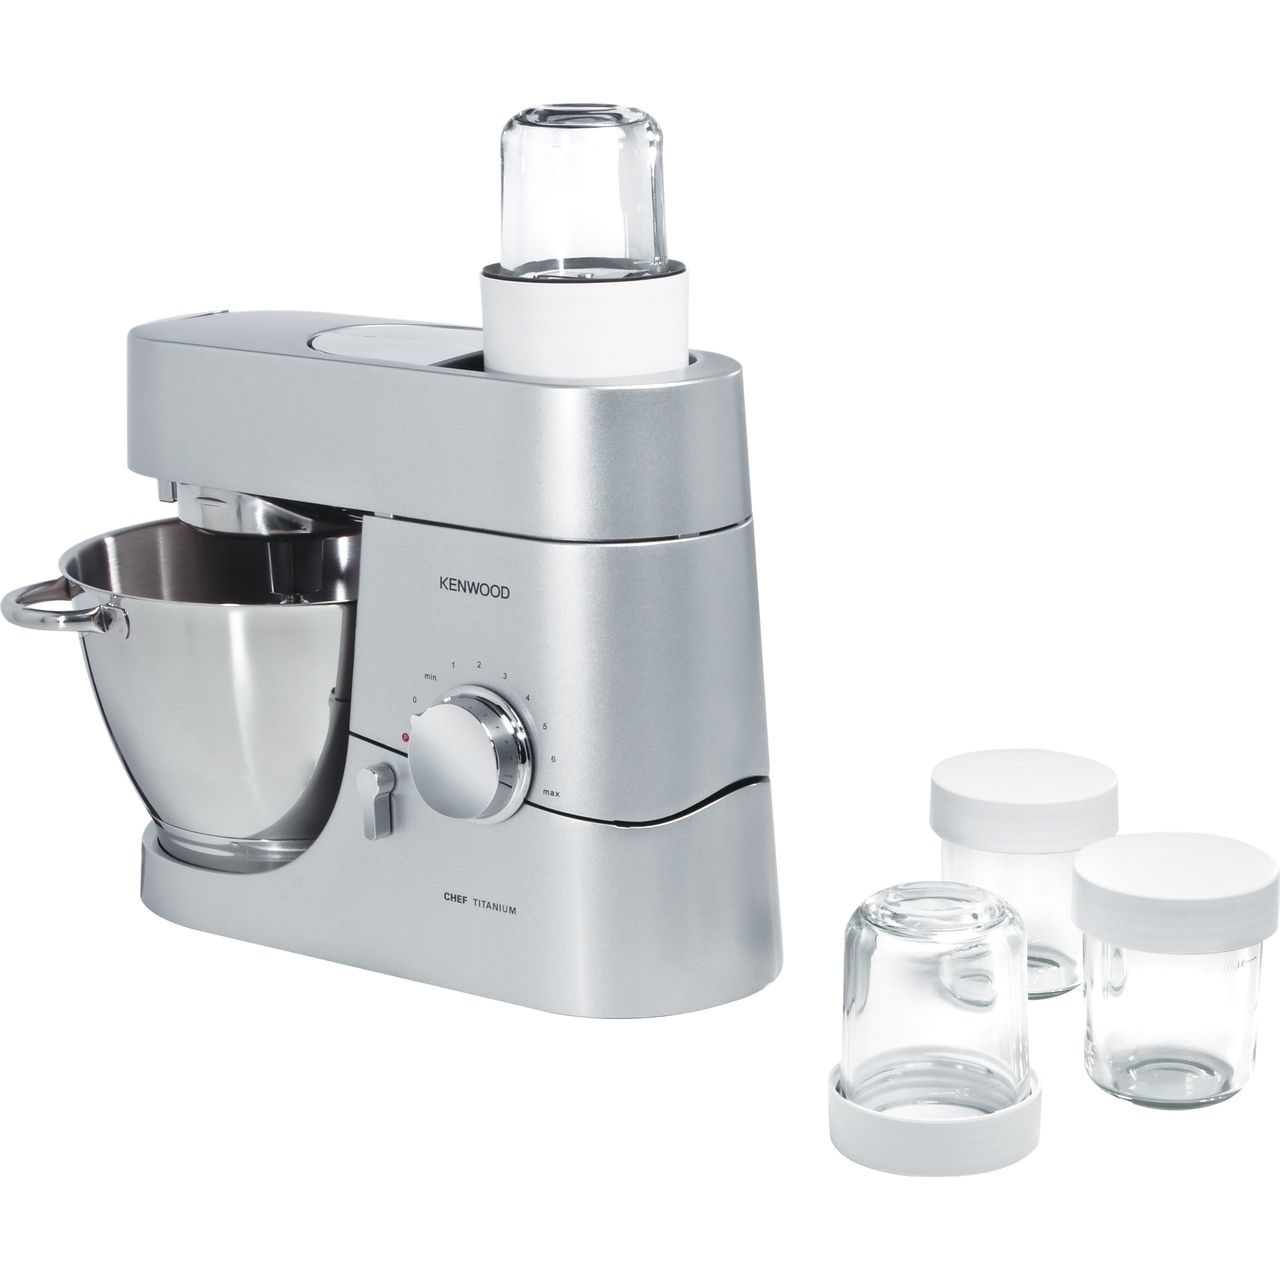 Kenwood Chef Attachments AT320A Food Mixer Attachment Review